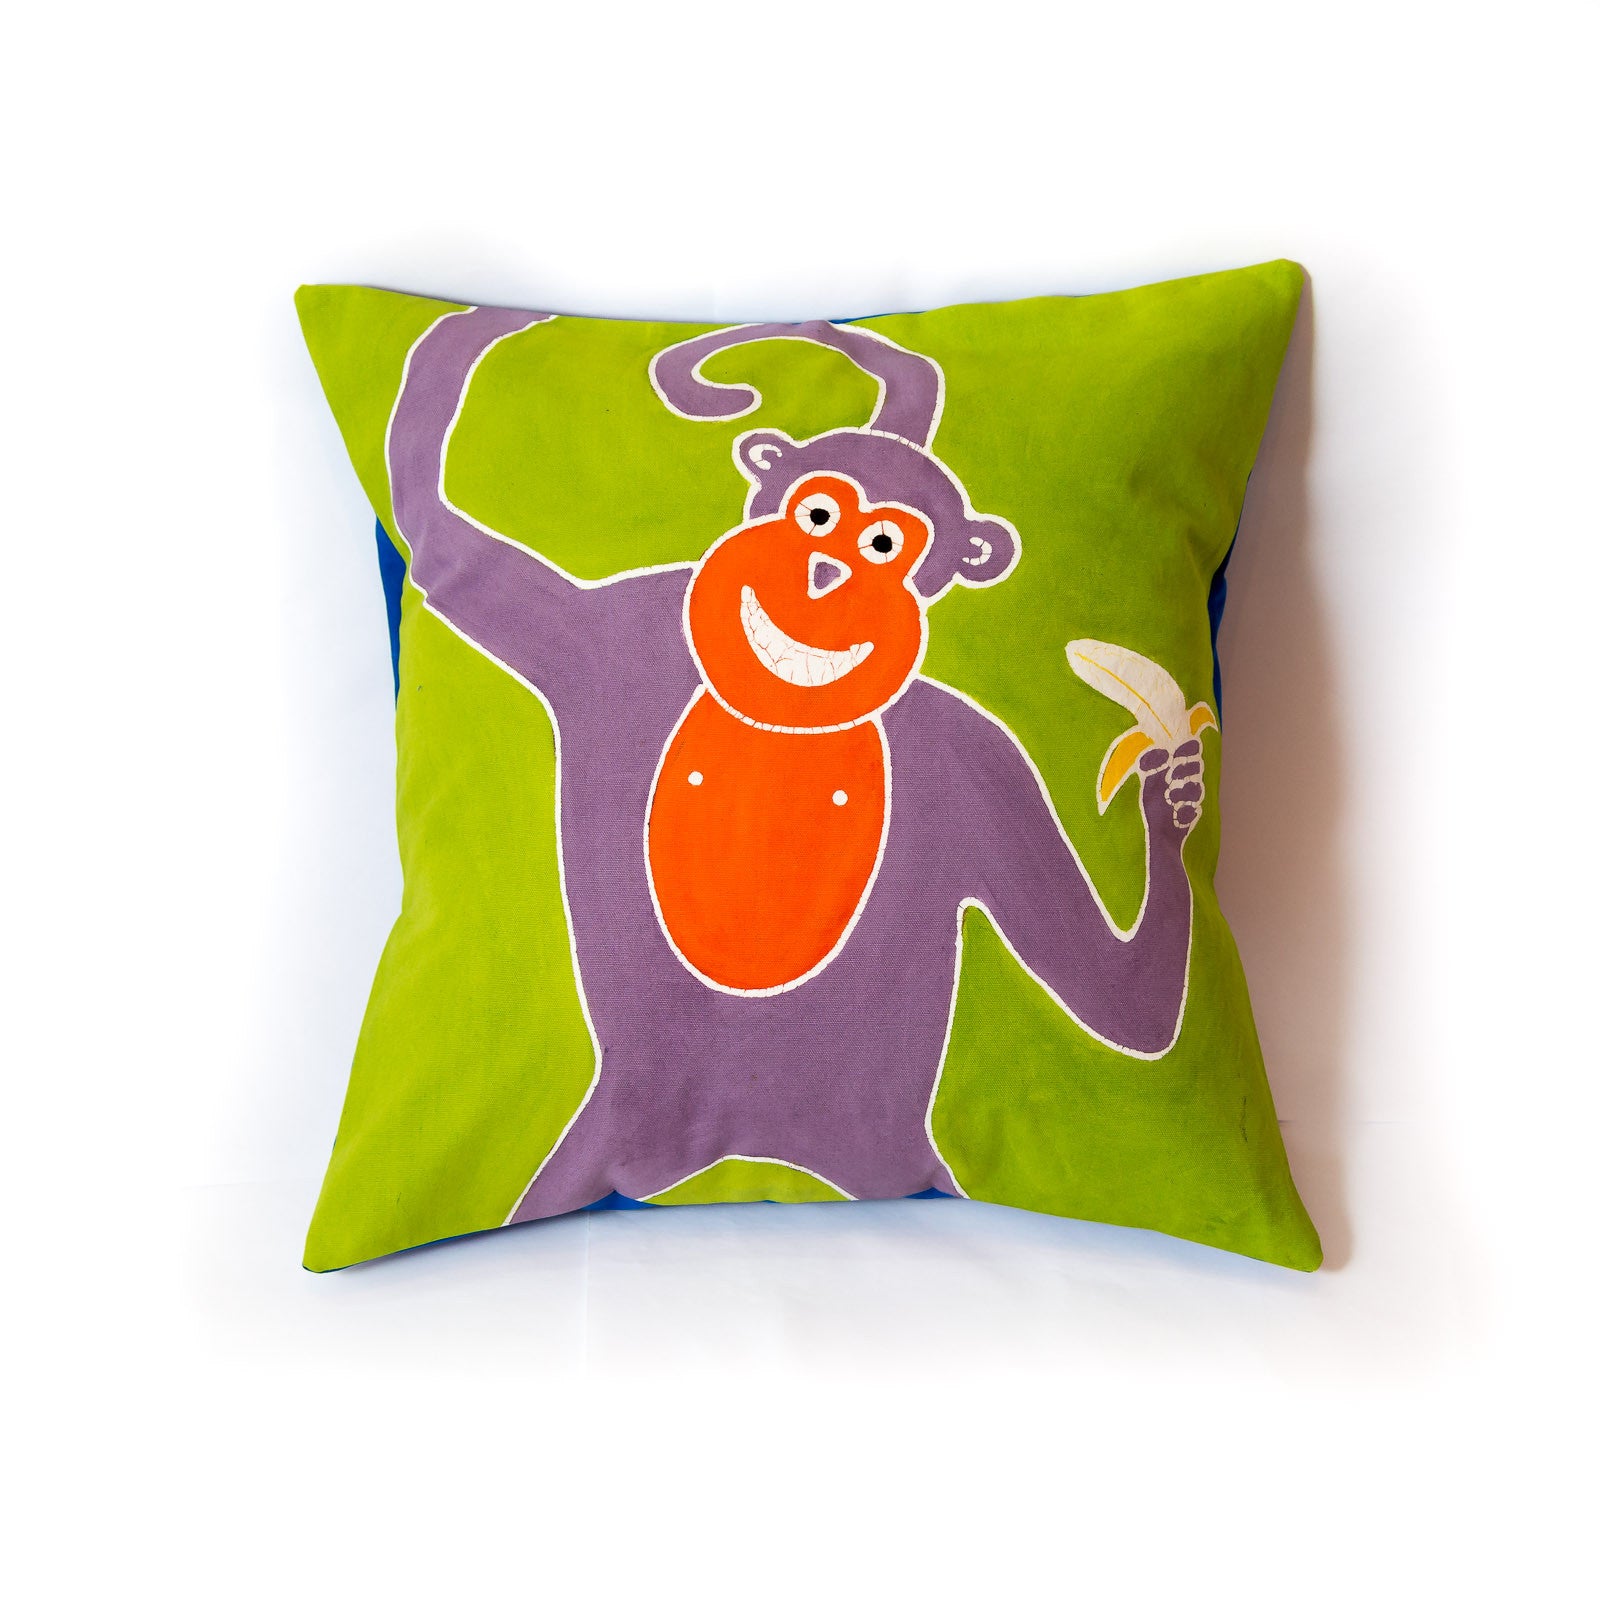 Fun and colourful monkey pillow to add bright colours and joy into your child's bedroom.